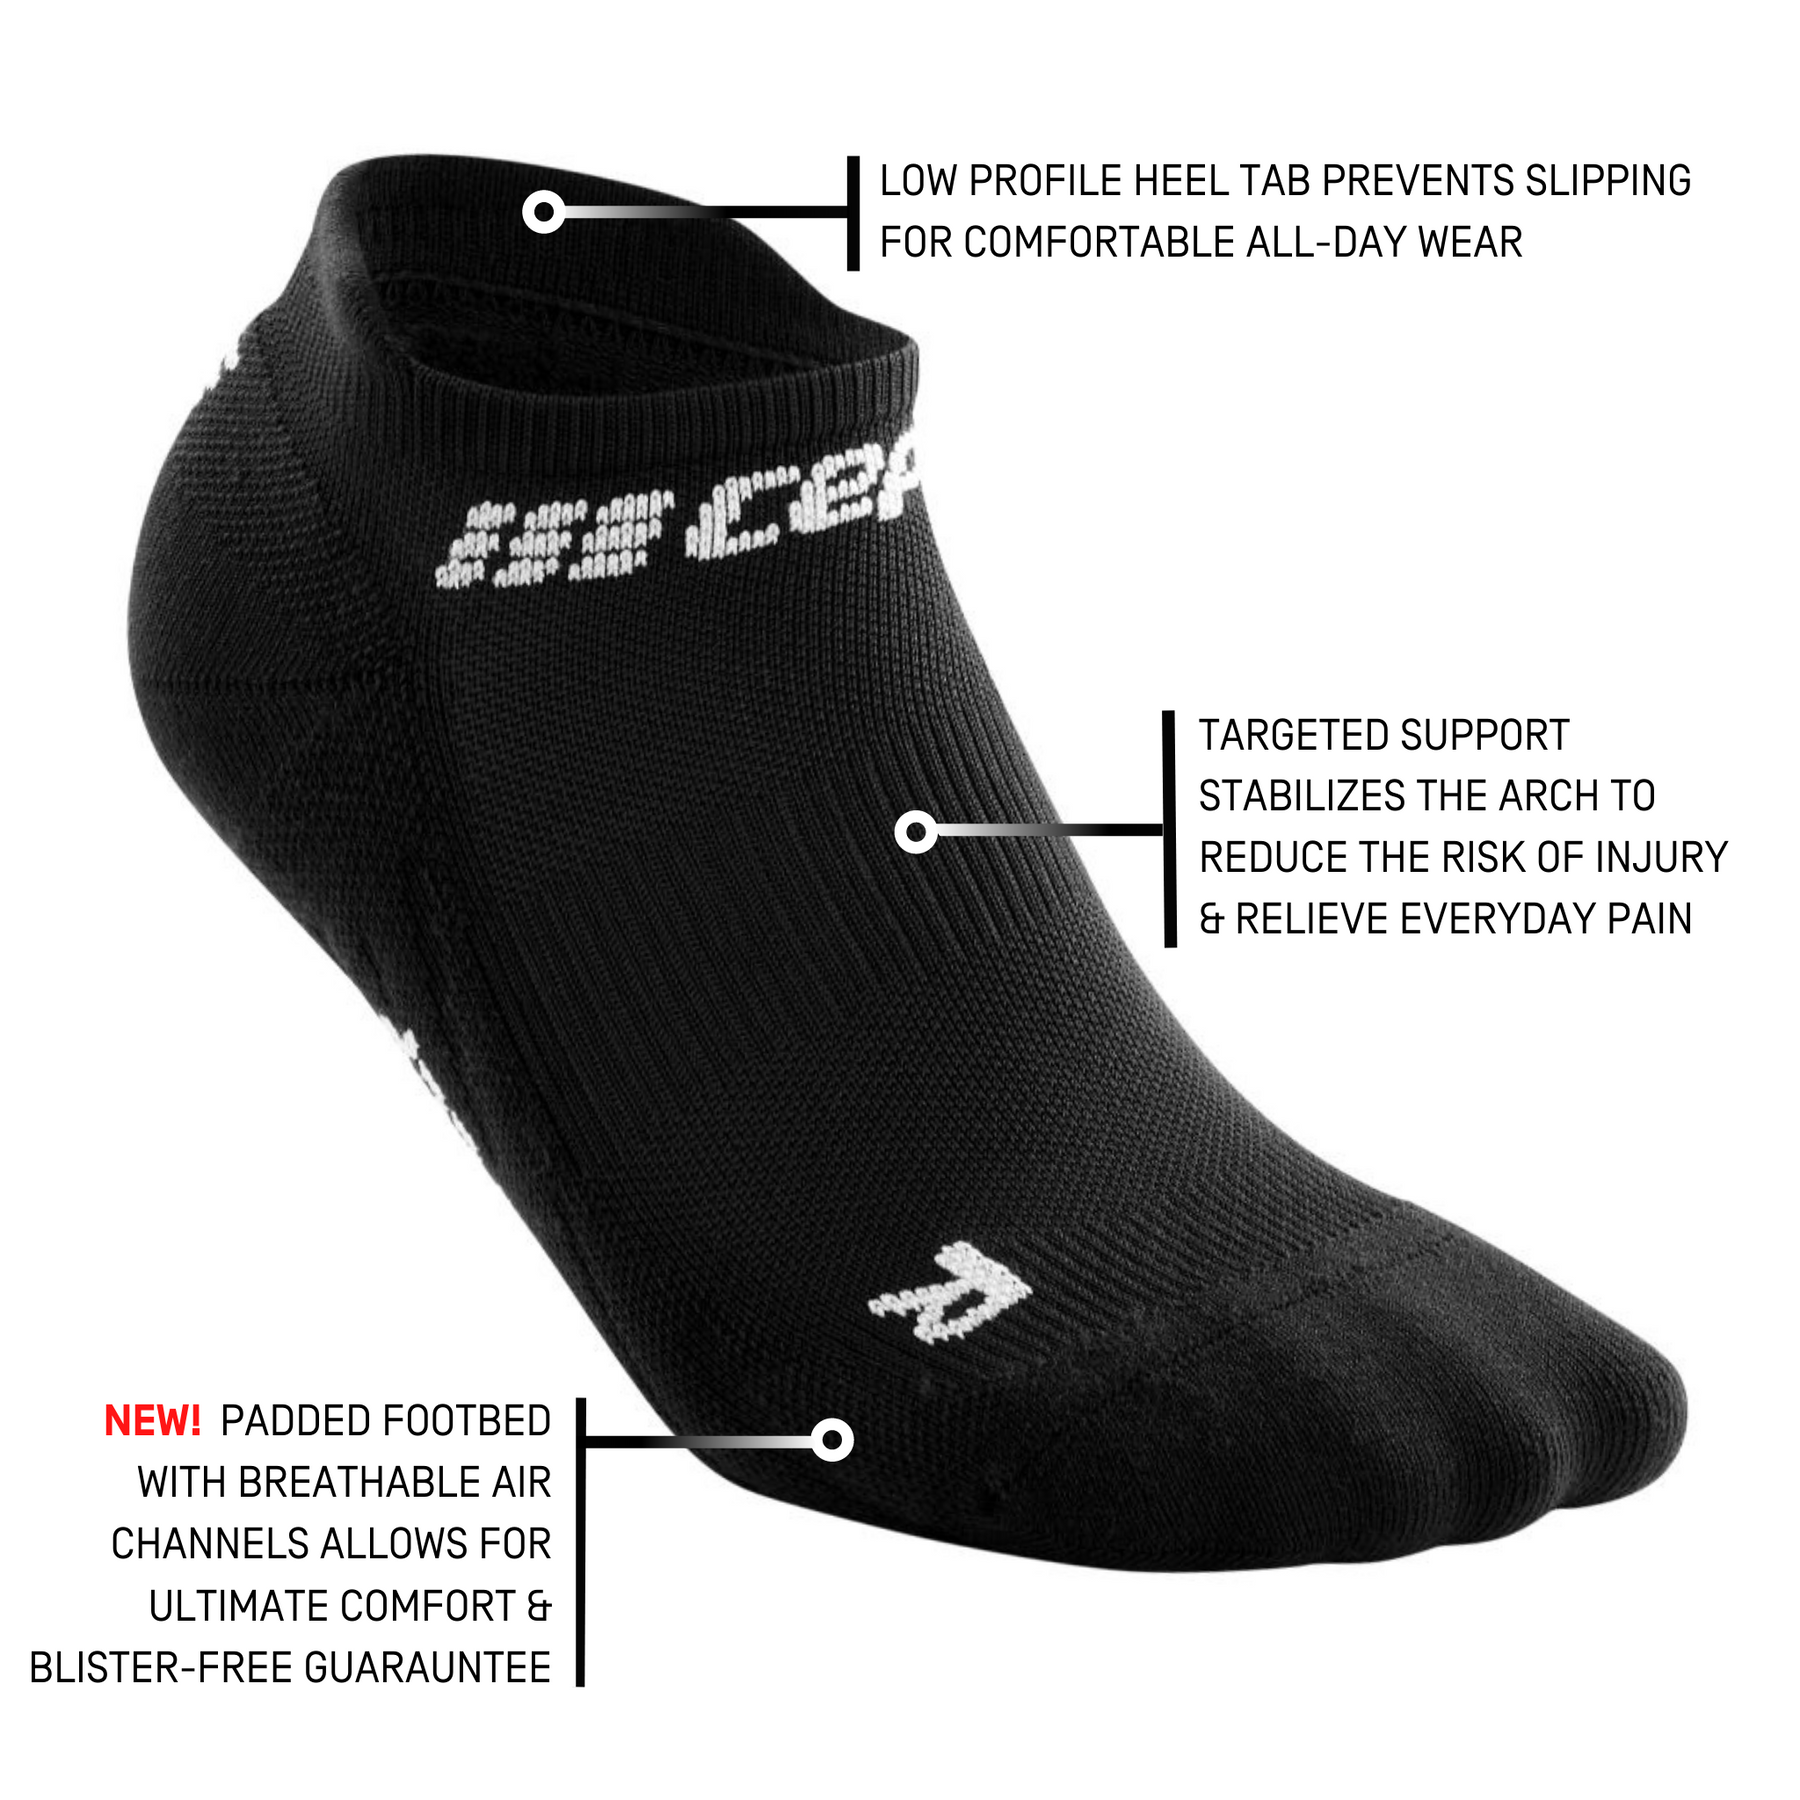 Black CEP No Show Compression Sock - Low profile heel prevents slipping, Targeted support stabilizes the arch, padded footbed for ultimate comfort